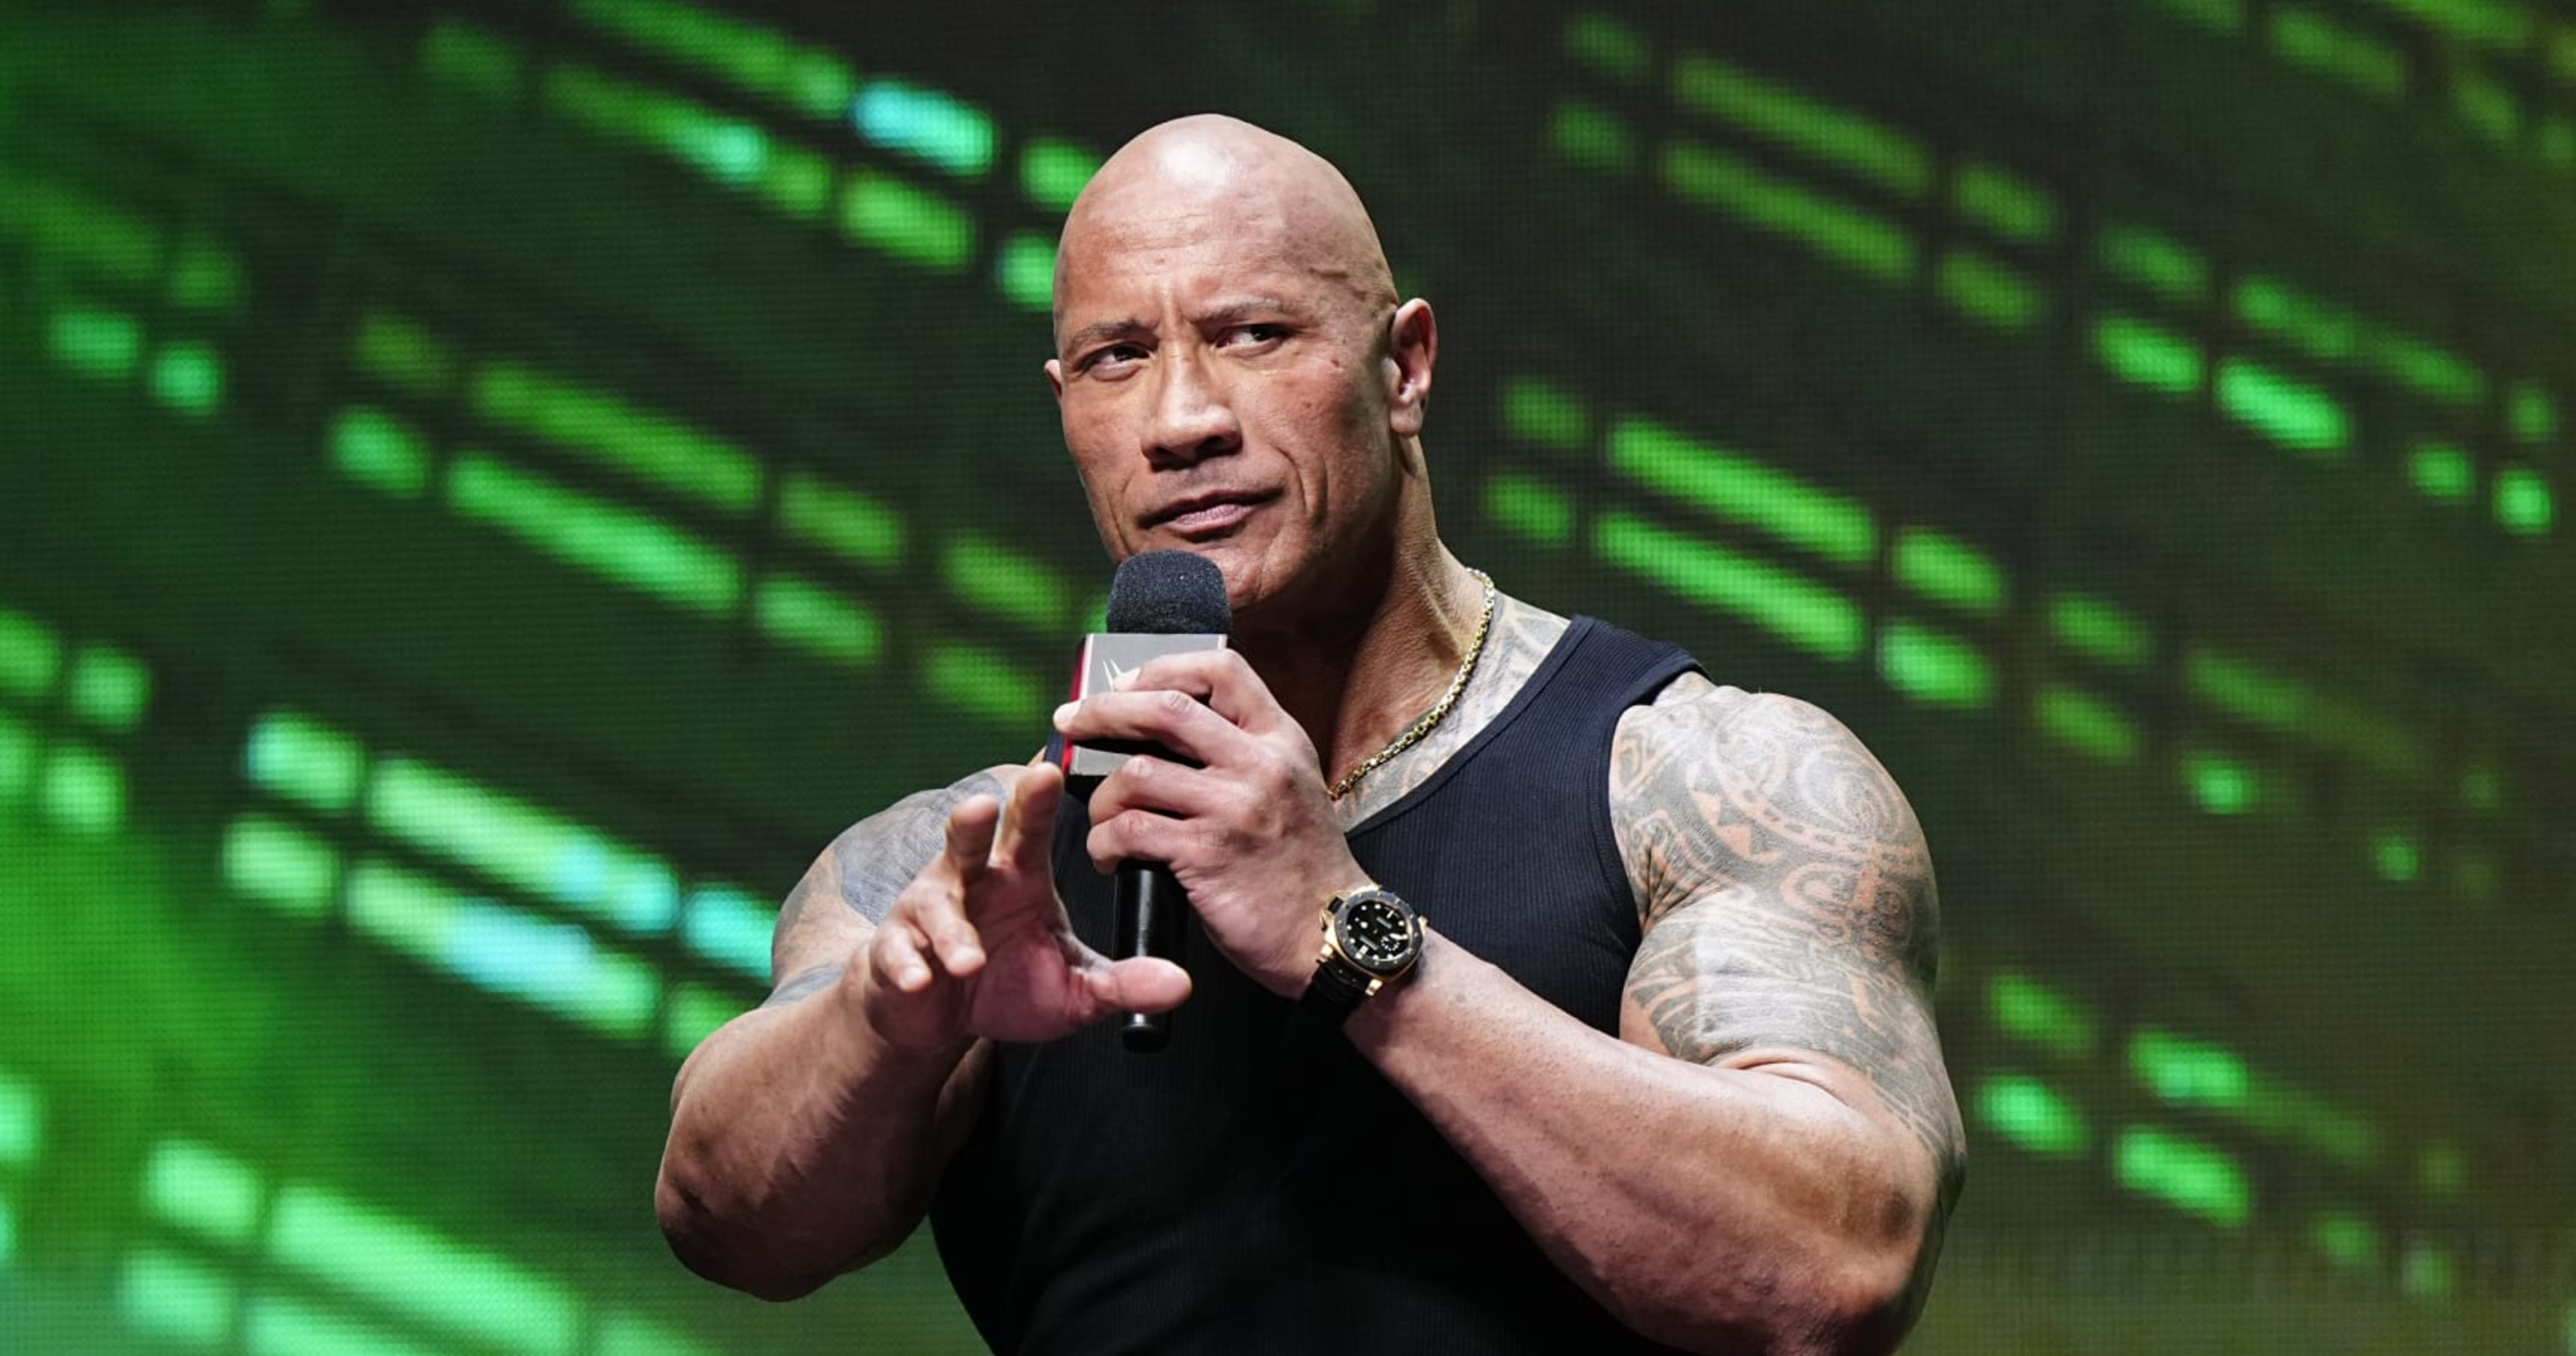 The Rock Addresses WWE Backstage Rumors on Profanity: 'I'd Rather Be Real Than Not'